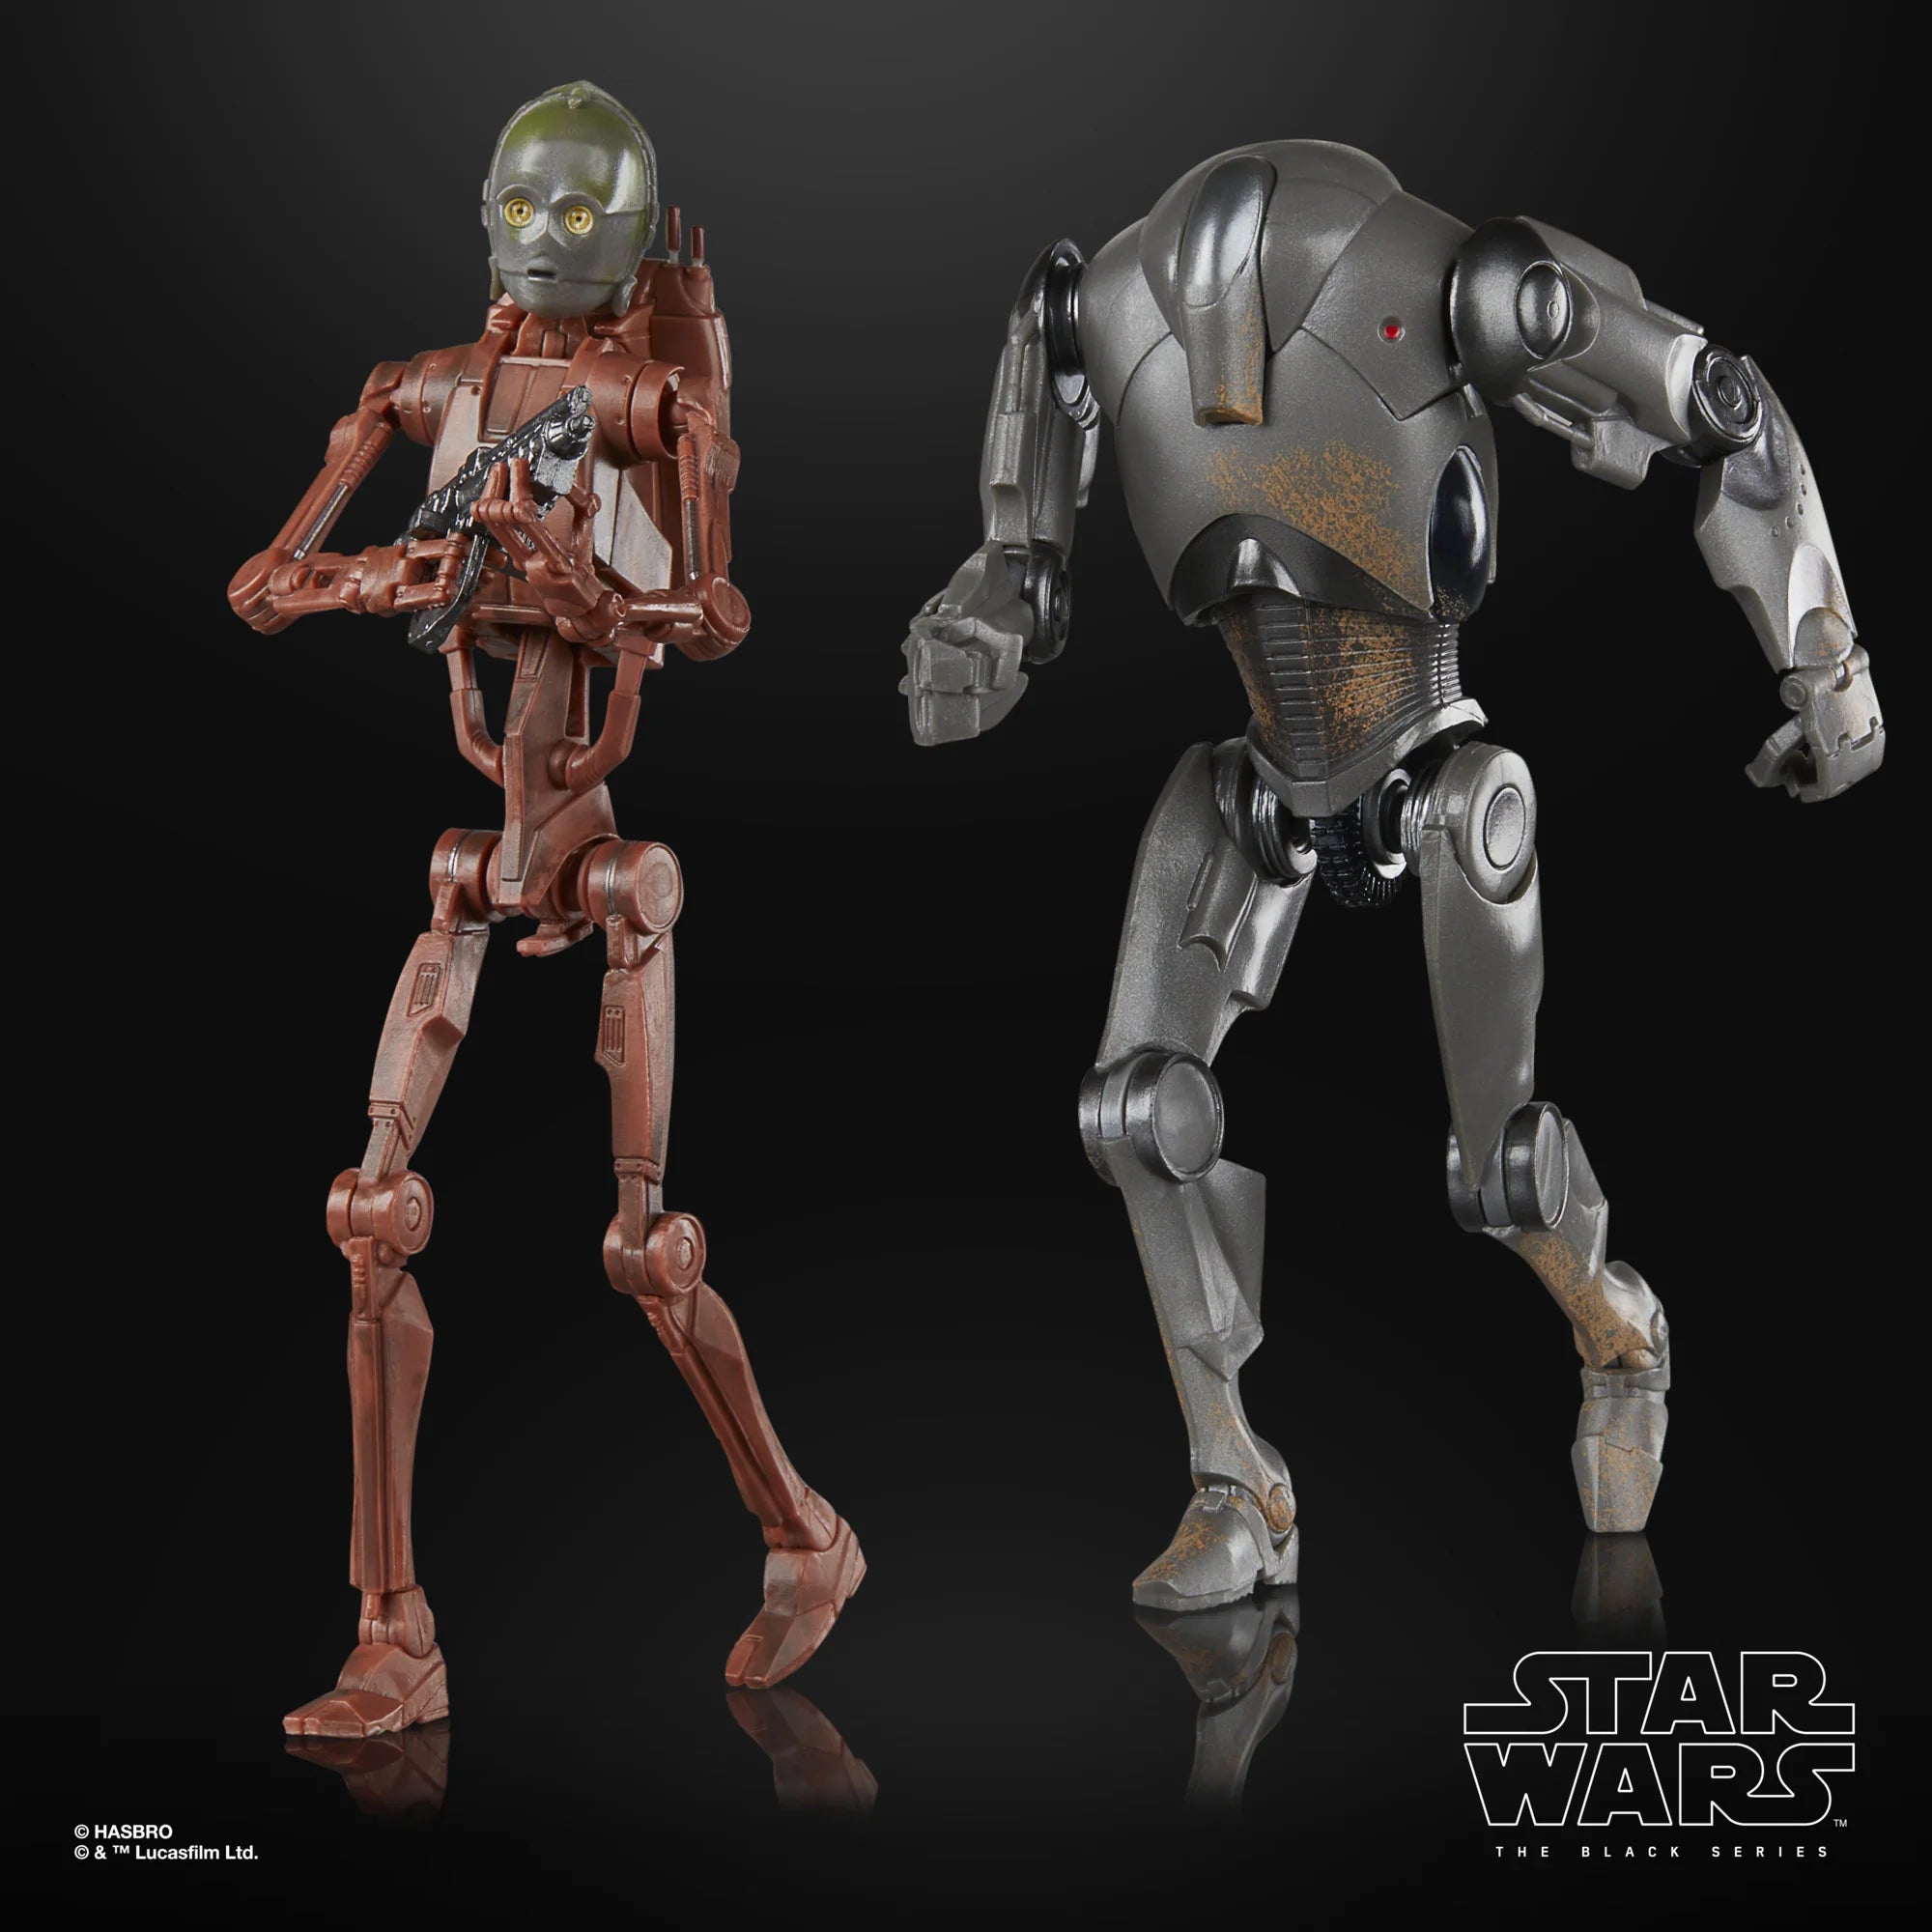 Hasbro Star Wars Black Series Attack of the Clones C-3PO (B1 Battle Droid Body and Super Battle Droid) Exclusive Action Figure